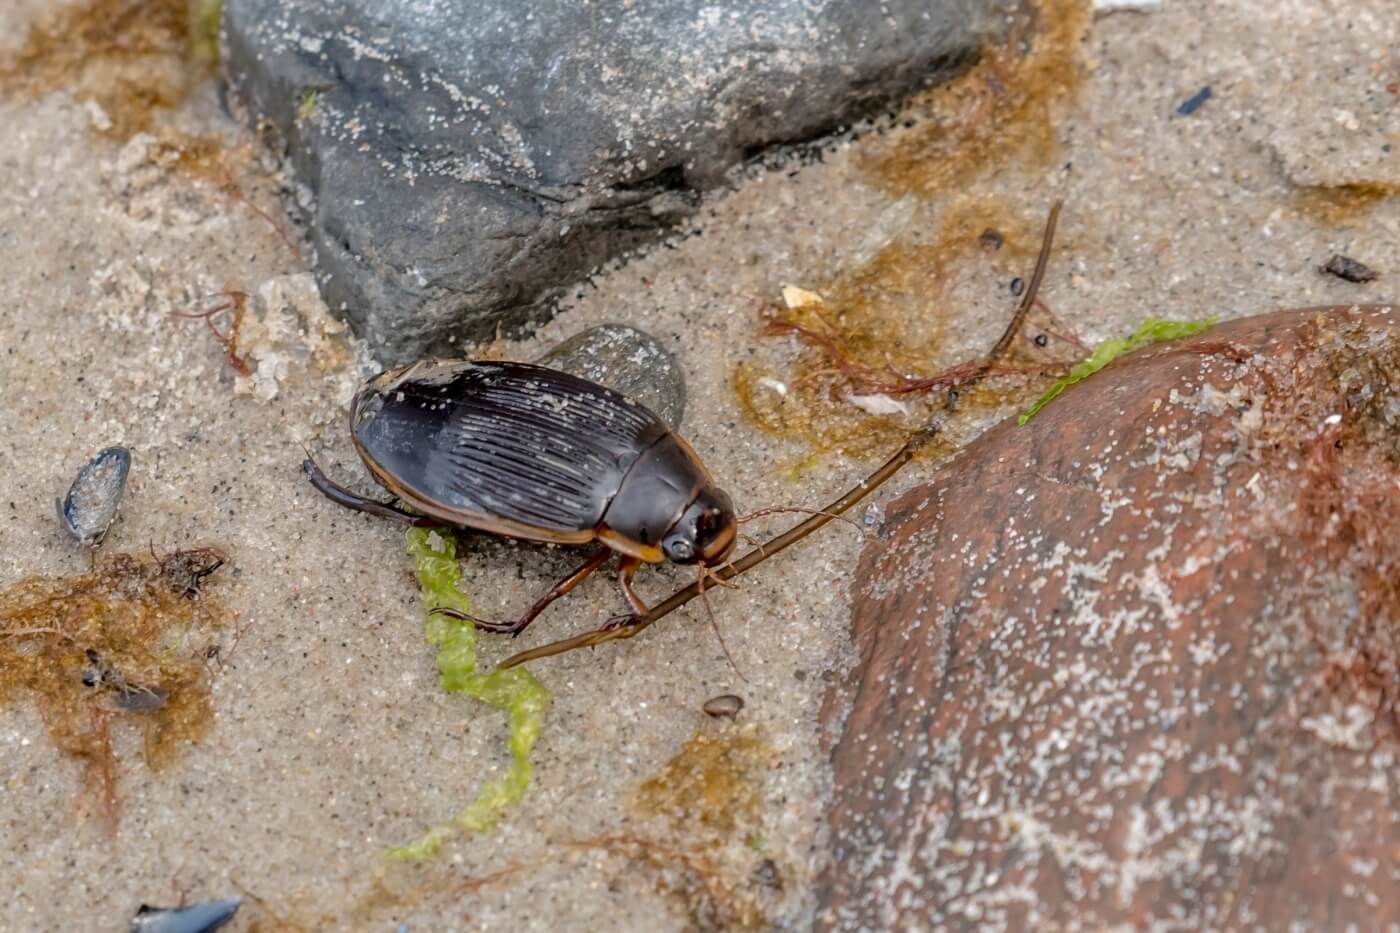 Large Diving Beetle crawls over stones. Photo by Janny